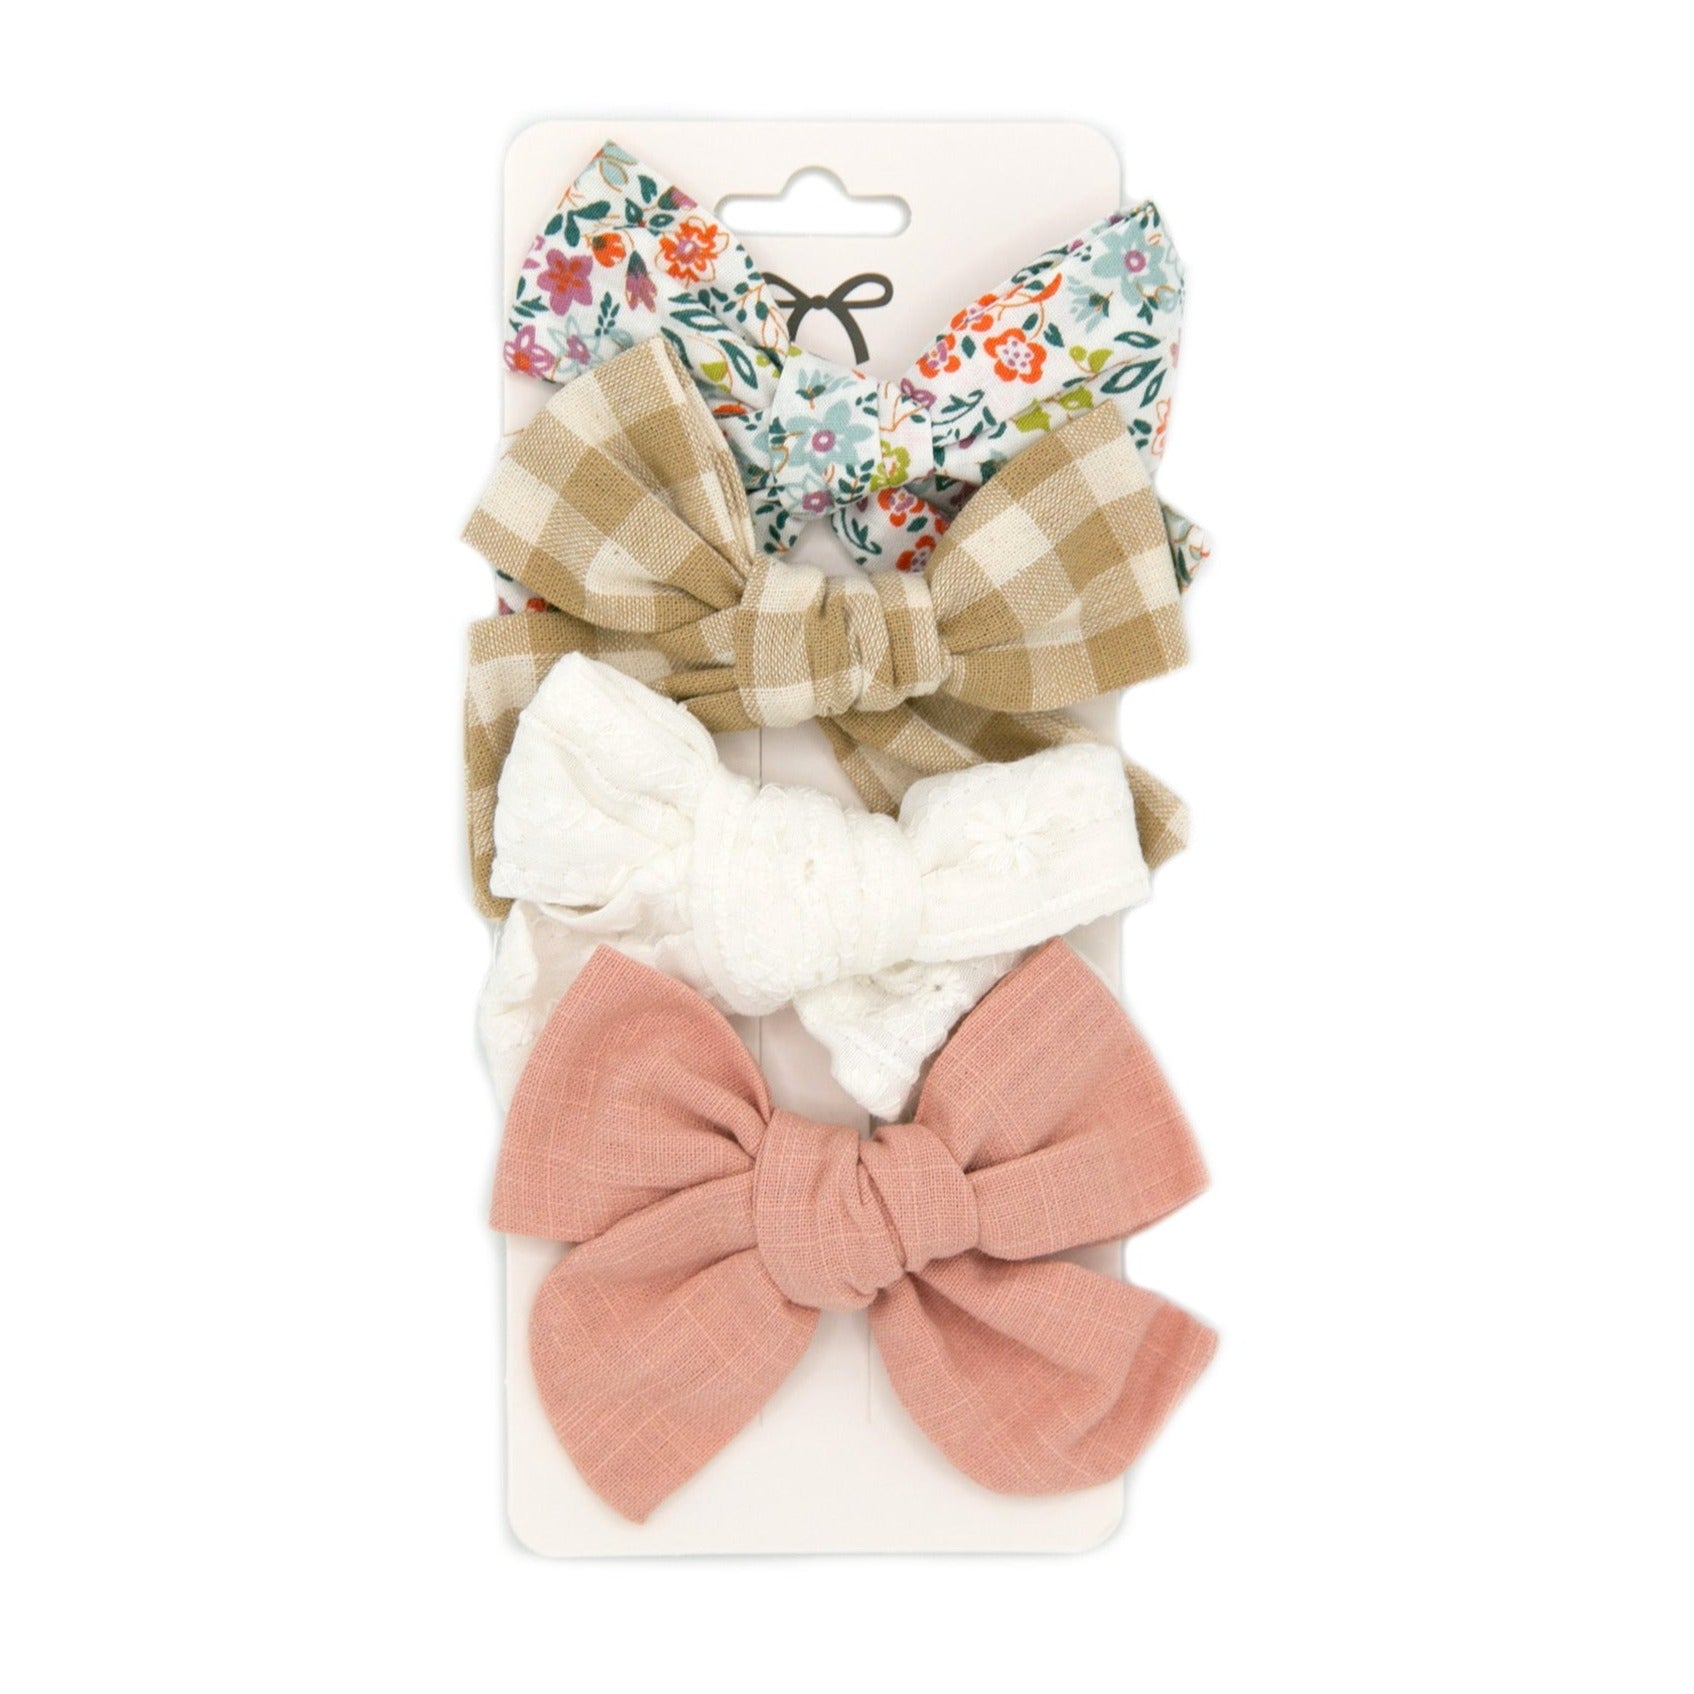 The Baby Cubby Bow Clip 4 Pack Set - Bright Floral, Tan Check, Pure White Eyelet, Blush